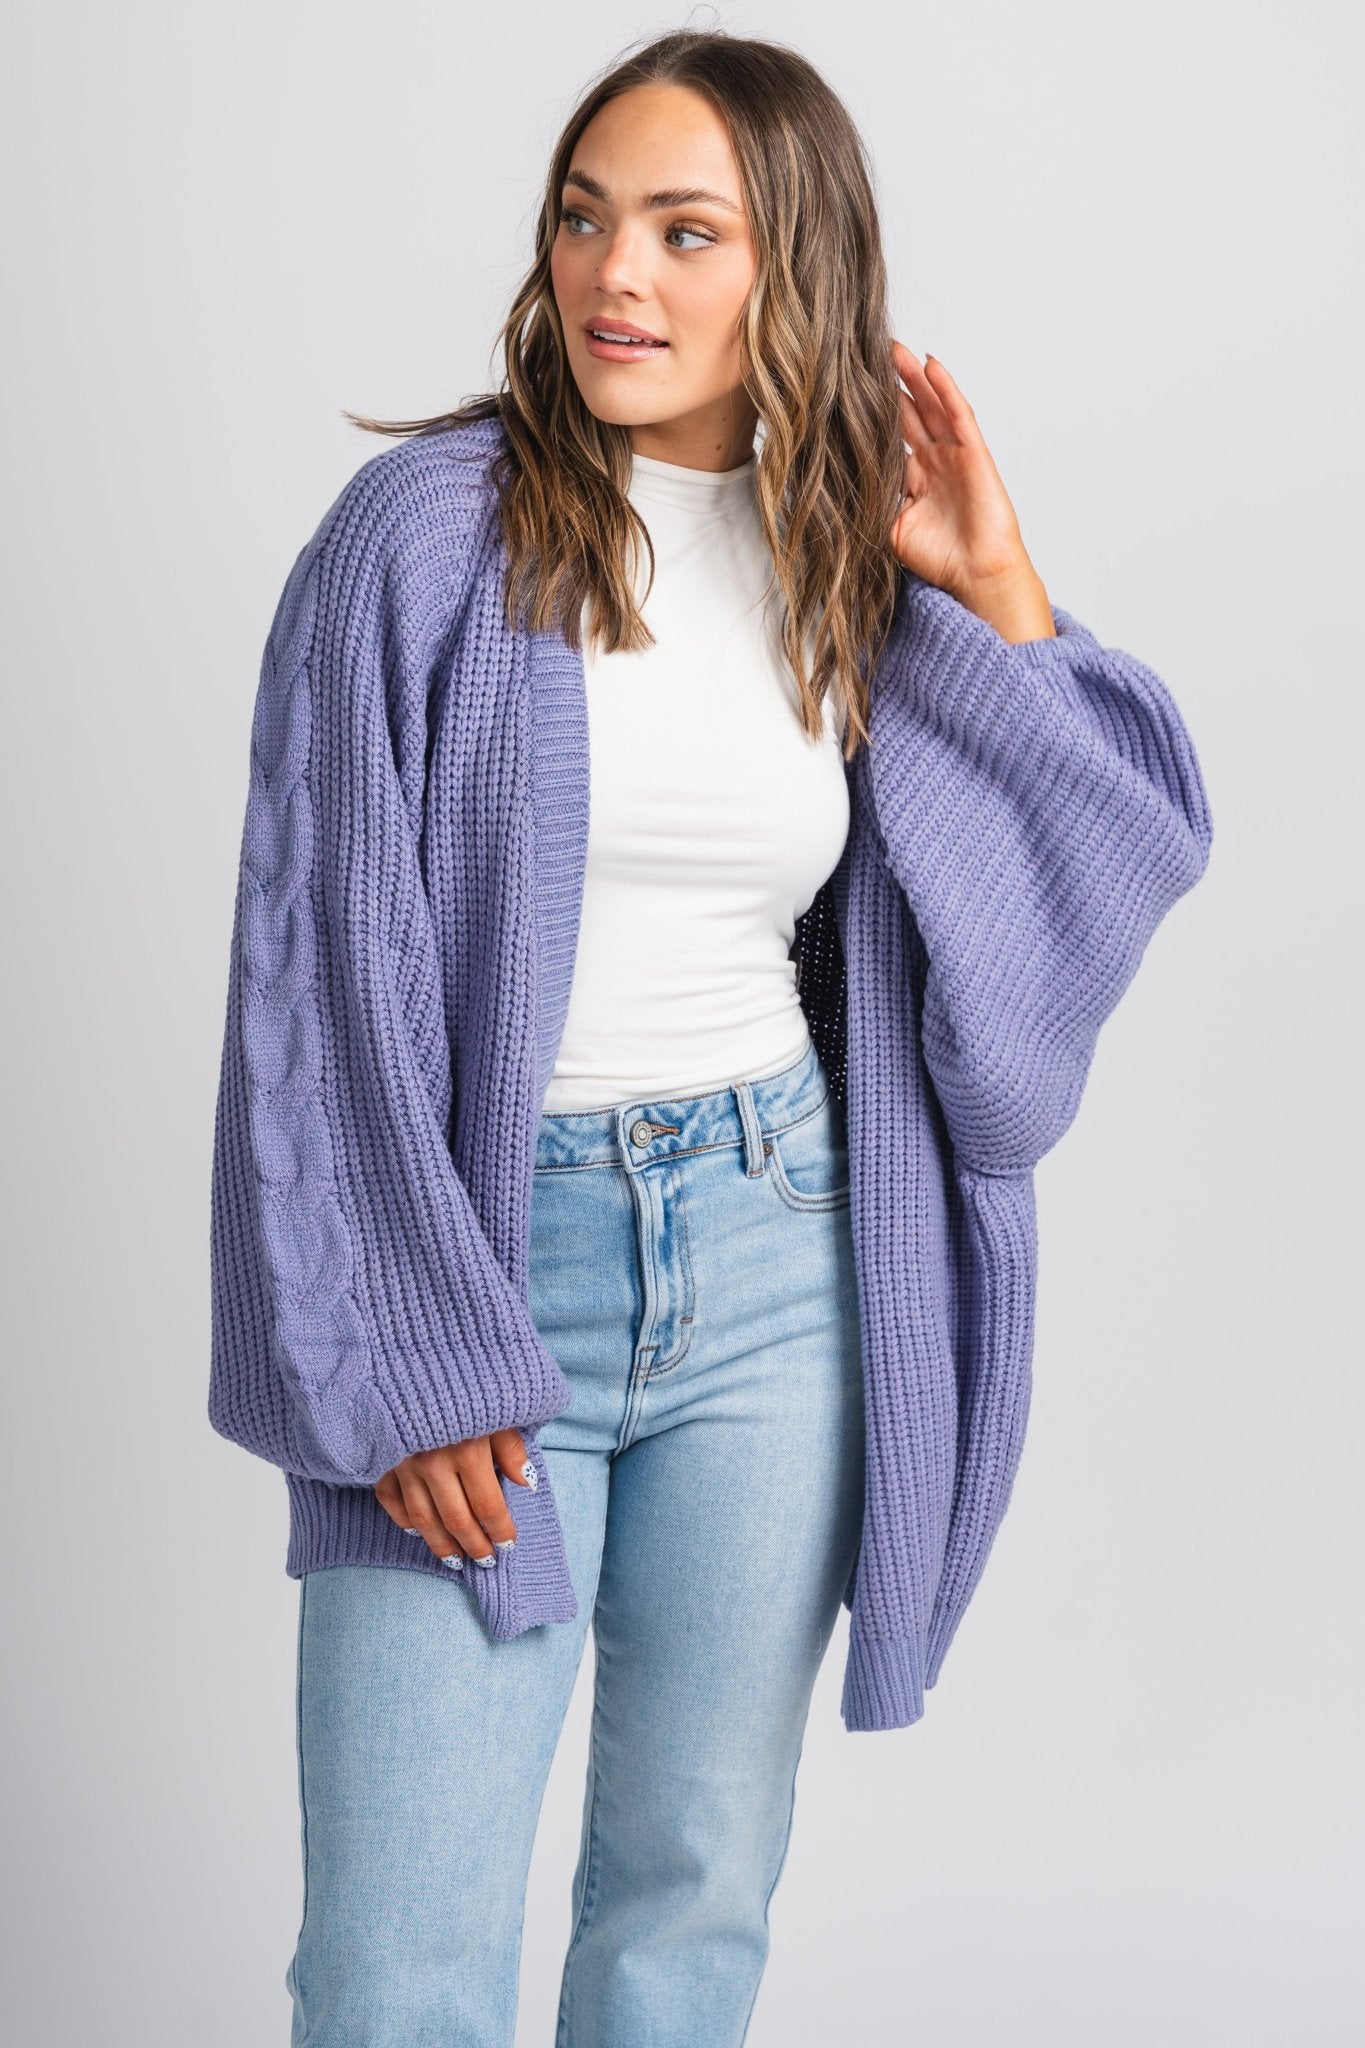 Cable knit cardigan periwinkle - Trendy Cardigan - Fun Easter Looks at Lush Fashion Lounge Boutique in Oklahoma